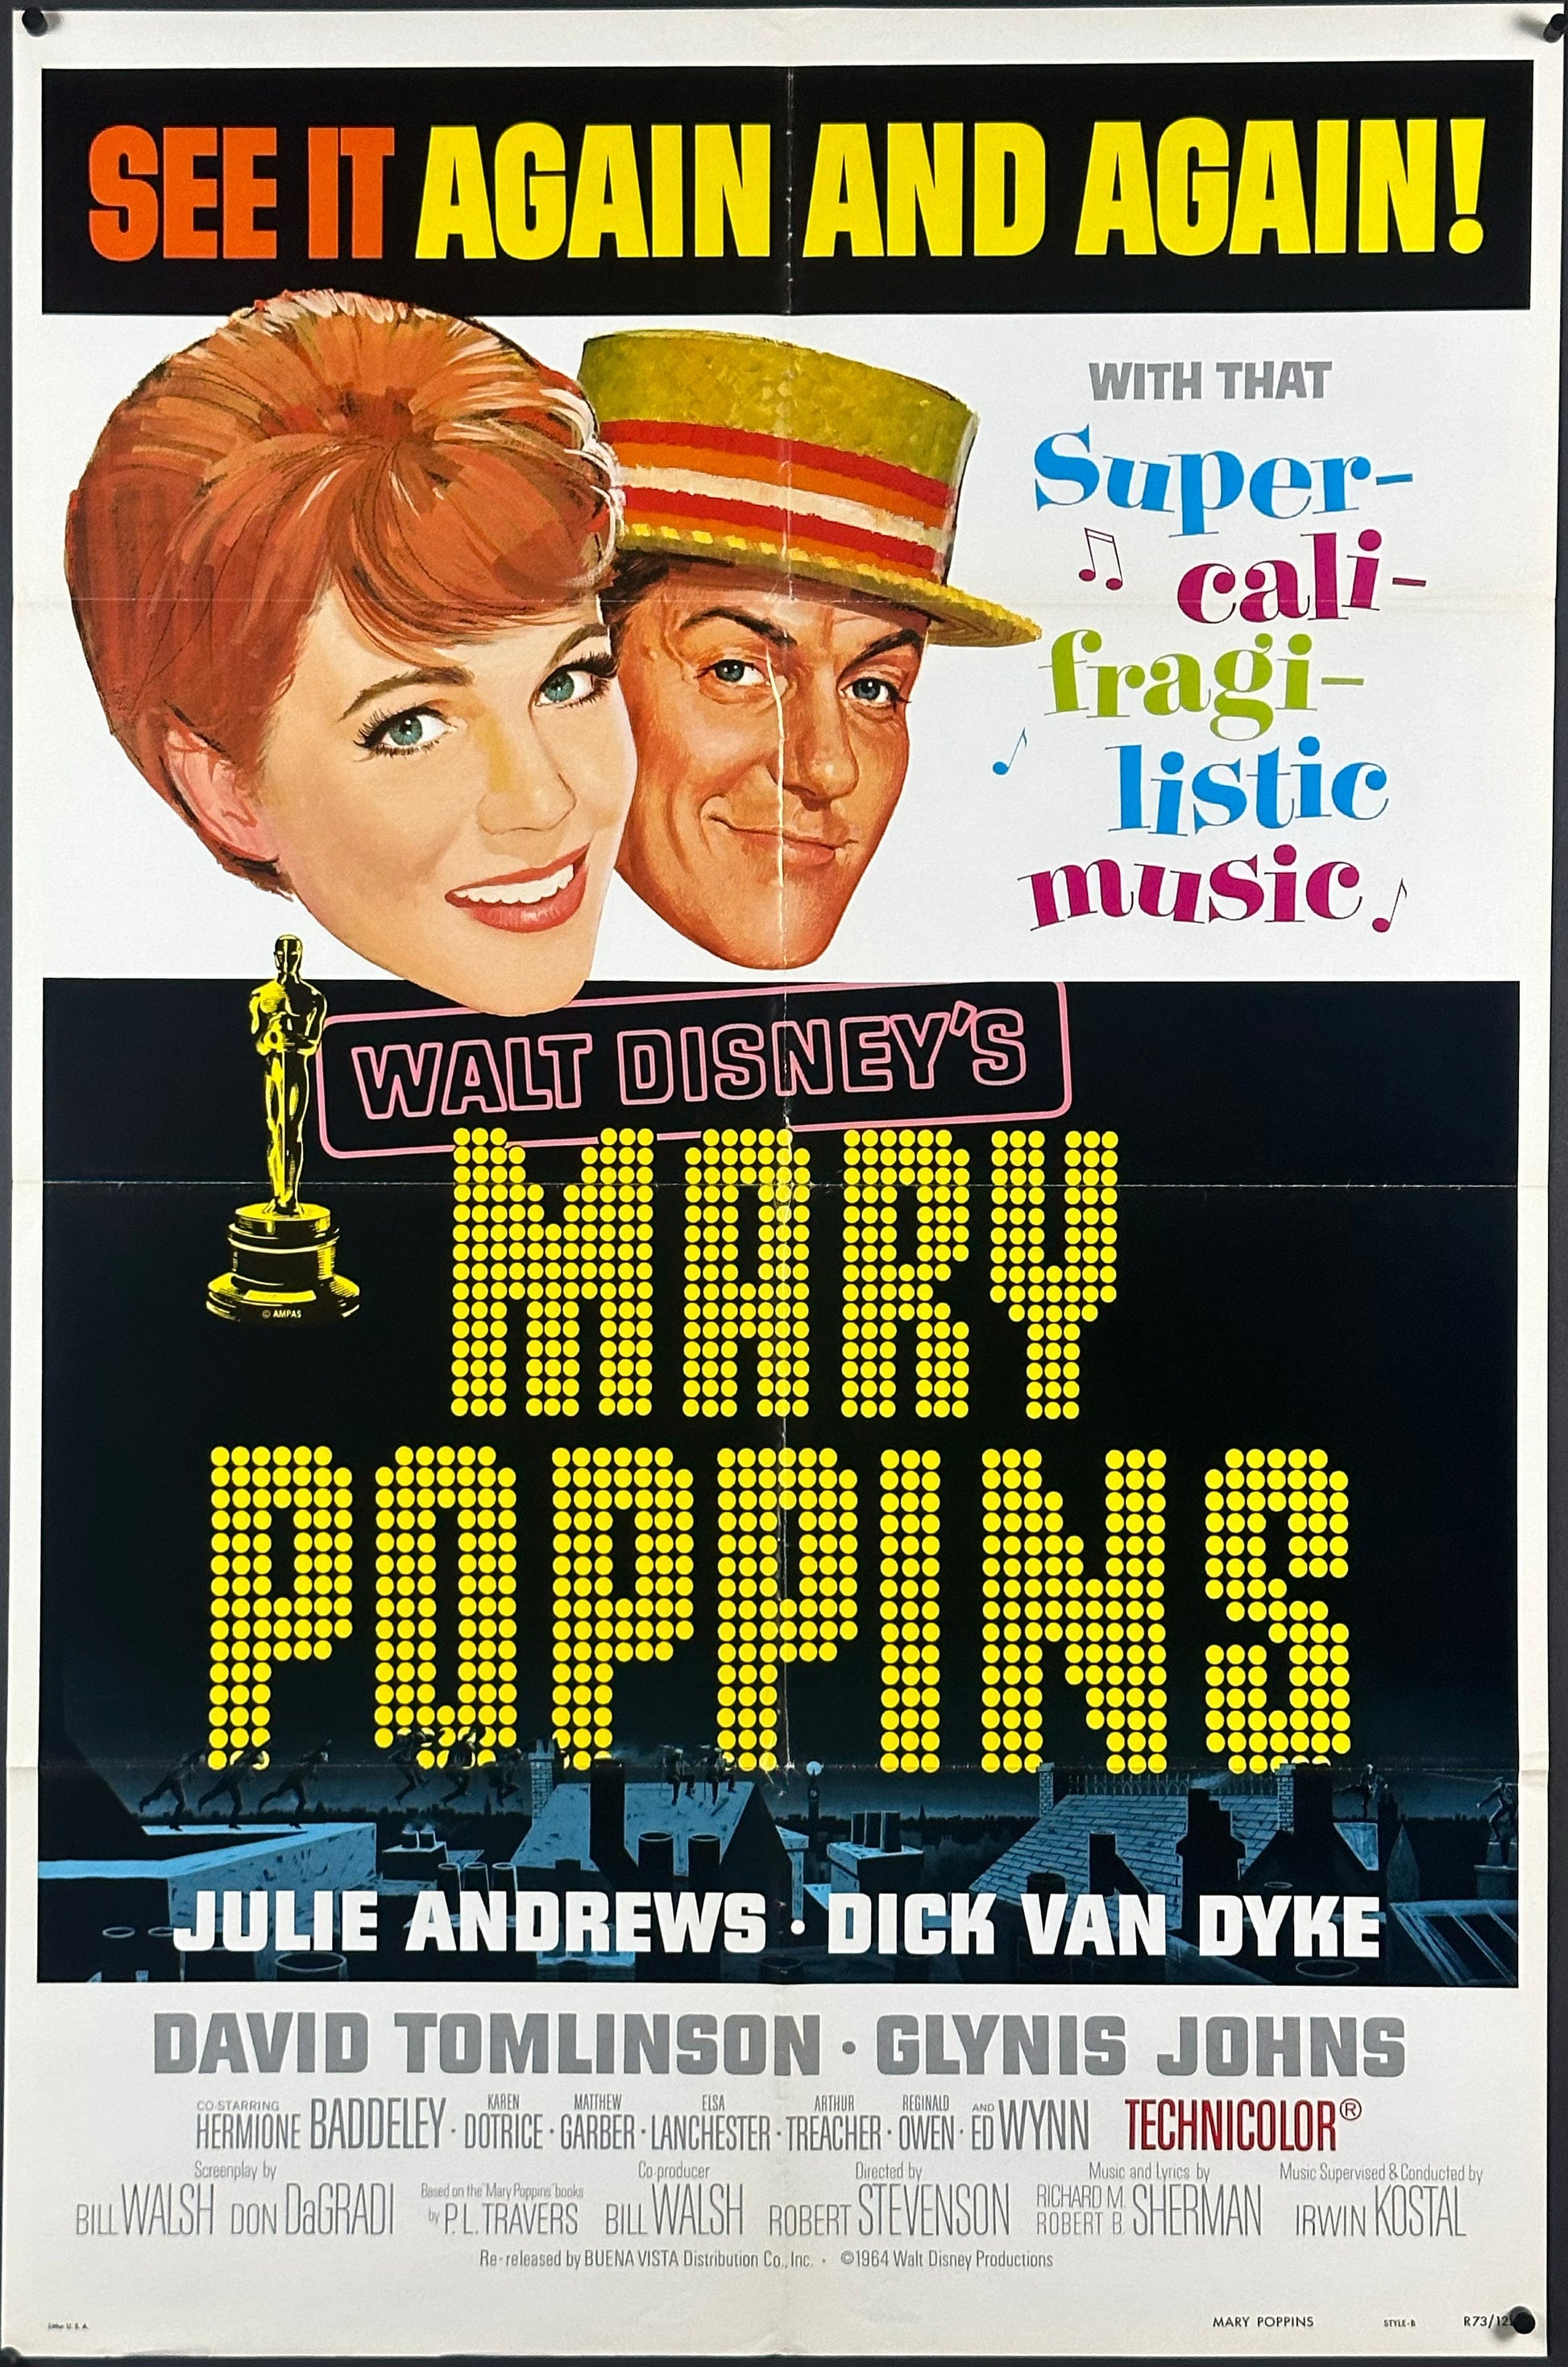 Mary Poppins - posterpalace.com